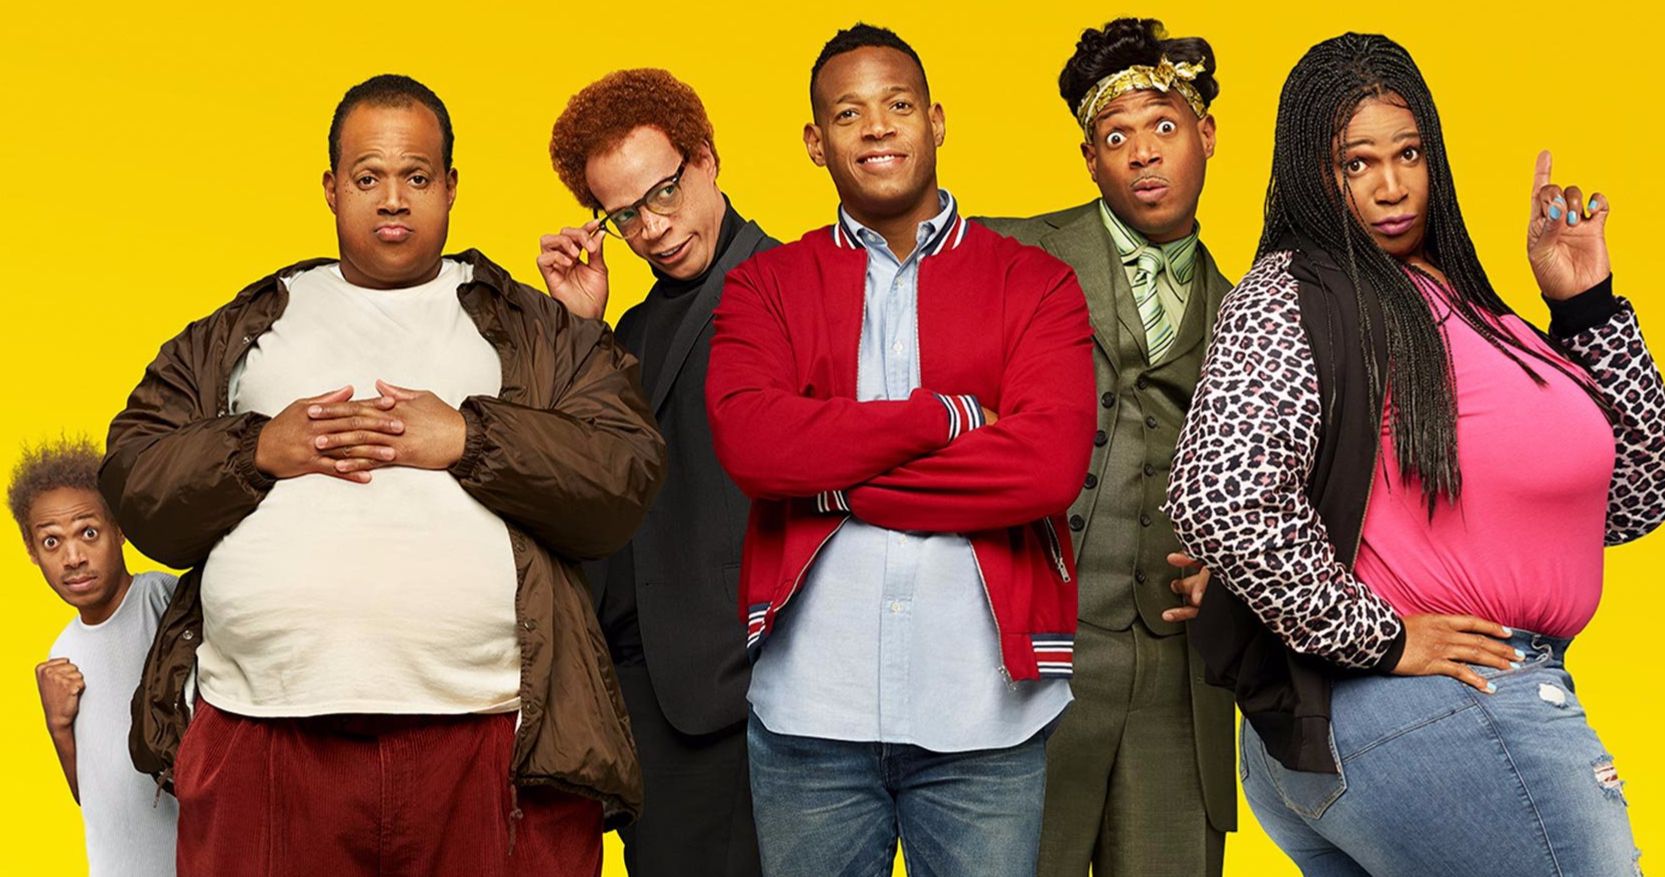 Sextuplets Trailer Has Marlon Wayans Channeling His Inner Klump to Play 6 Siblings